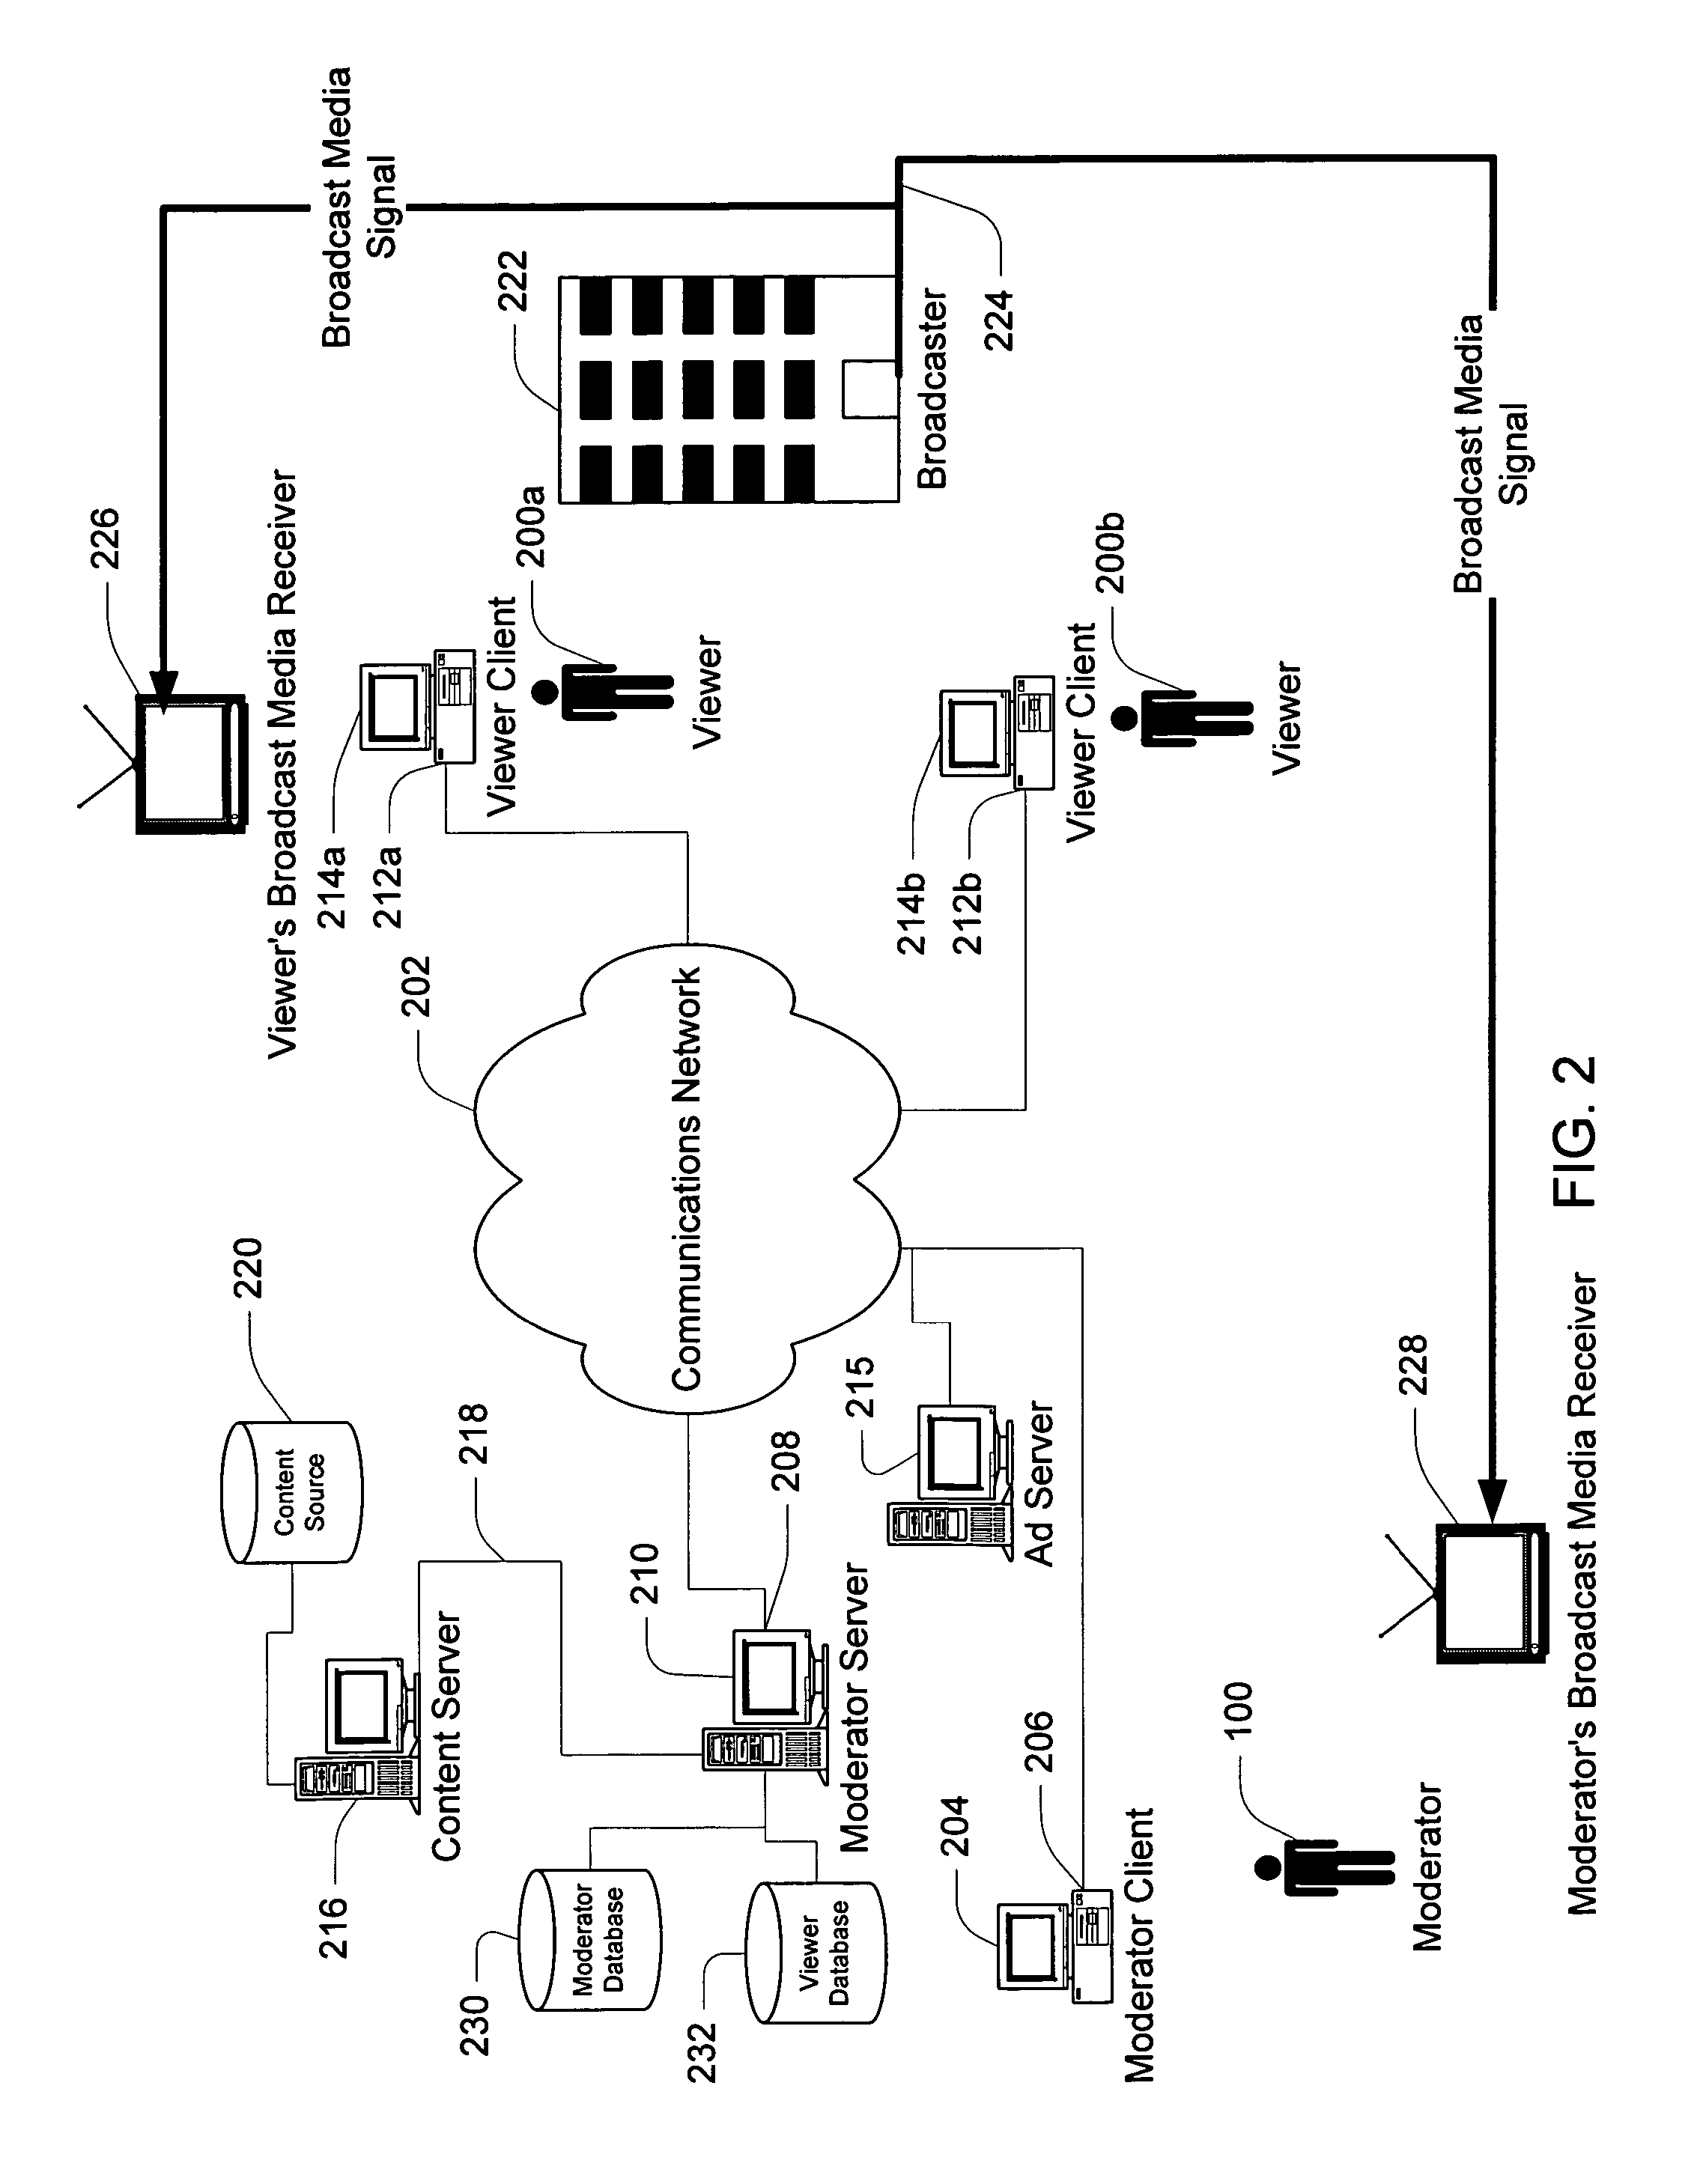 Method and apparatus for internet-based interactive programming